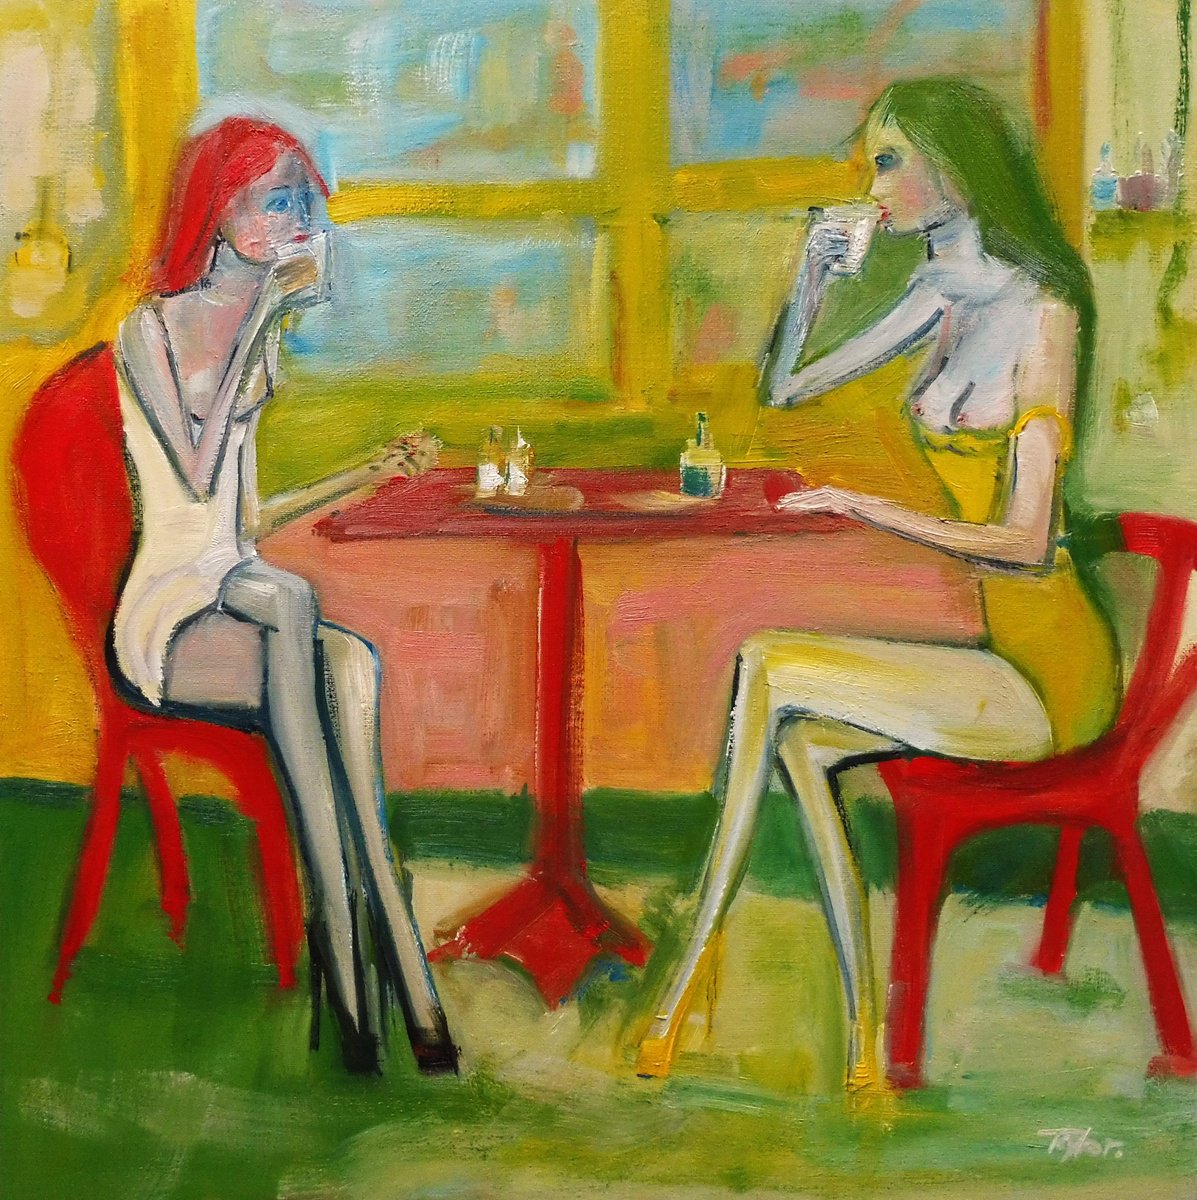 FASHION MODELS, CAFE, YELLOW WHITE DRESSES. by Tim Taylor